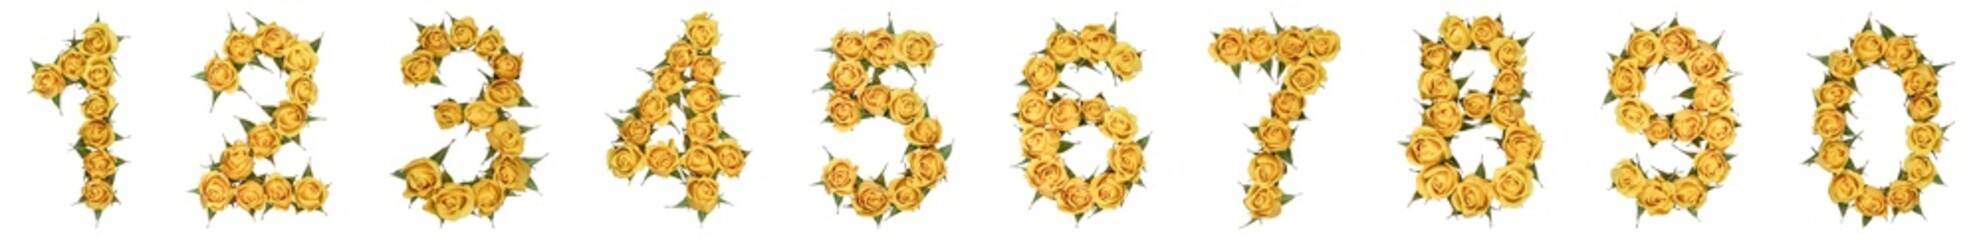 Set of arabic numbers from natural yellow flowers of roses, isolated on white background